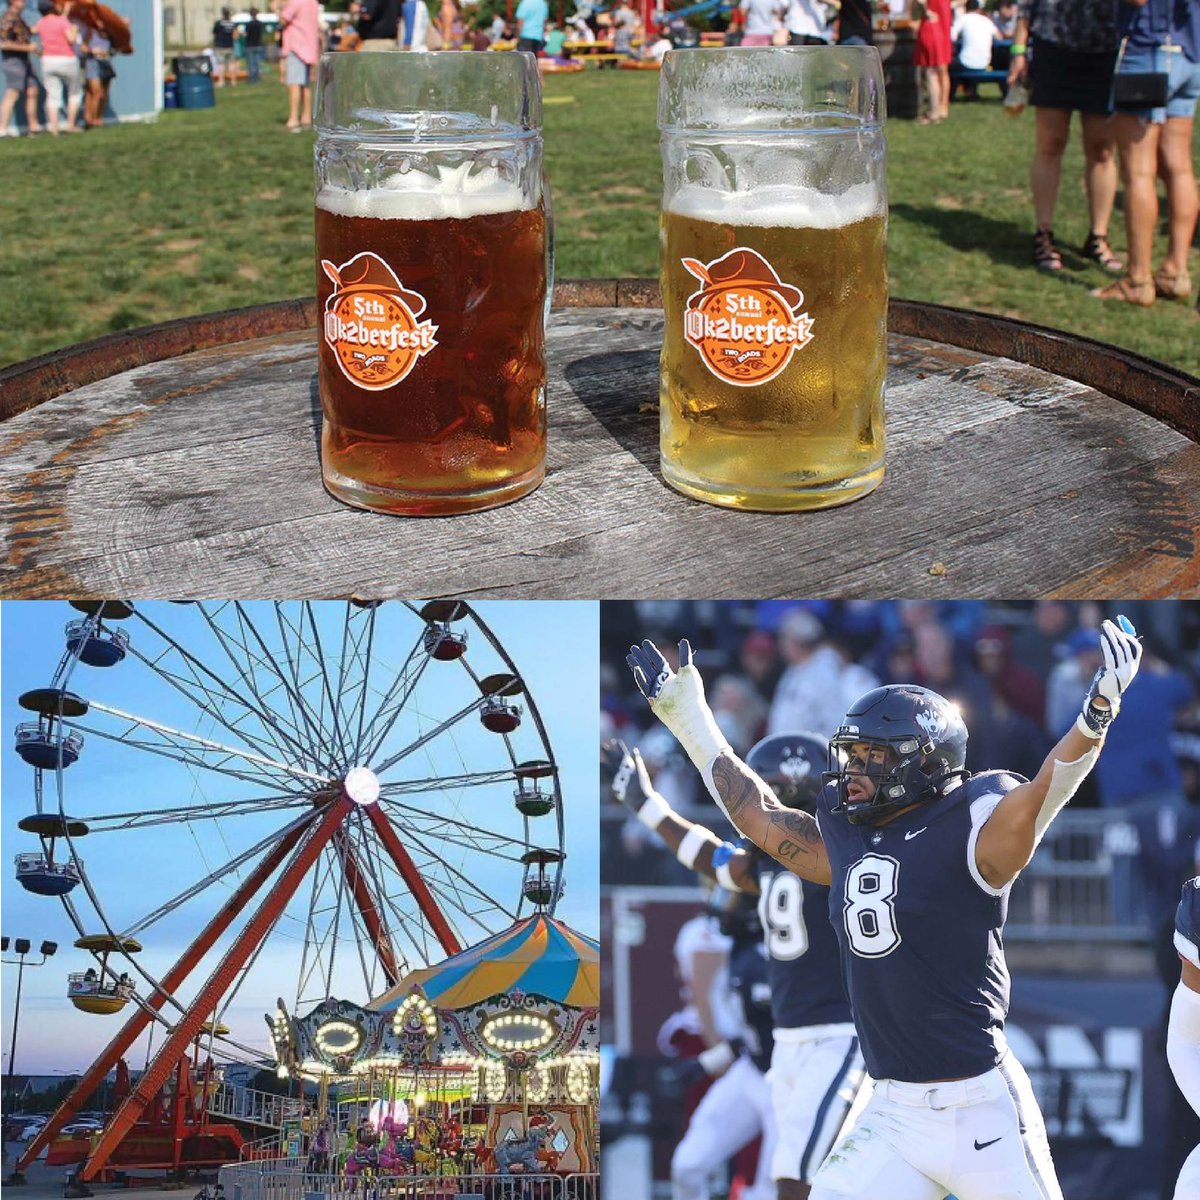 A quintessential fall weekend is in the cards with festivals, fairs, and football. 

🍻 OK2BERFEST at Two Roads Brewing in Shelton
🎡Berlin Fair in Berlin
🏟️UConn Vs FIU at Rentschler Field

#Ctvisit #CTvibe